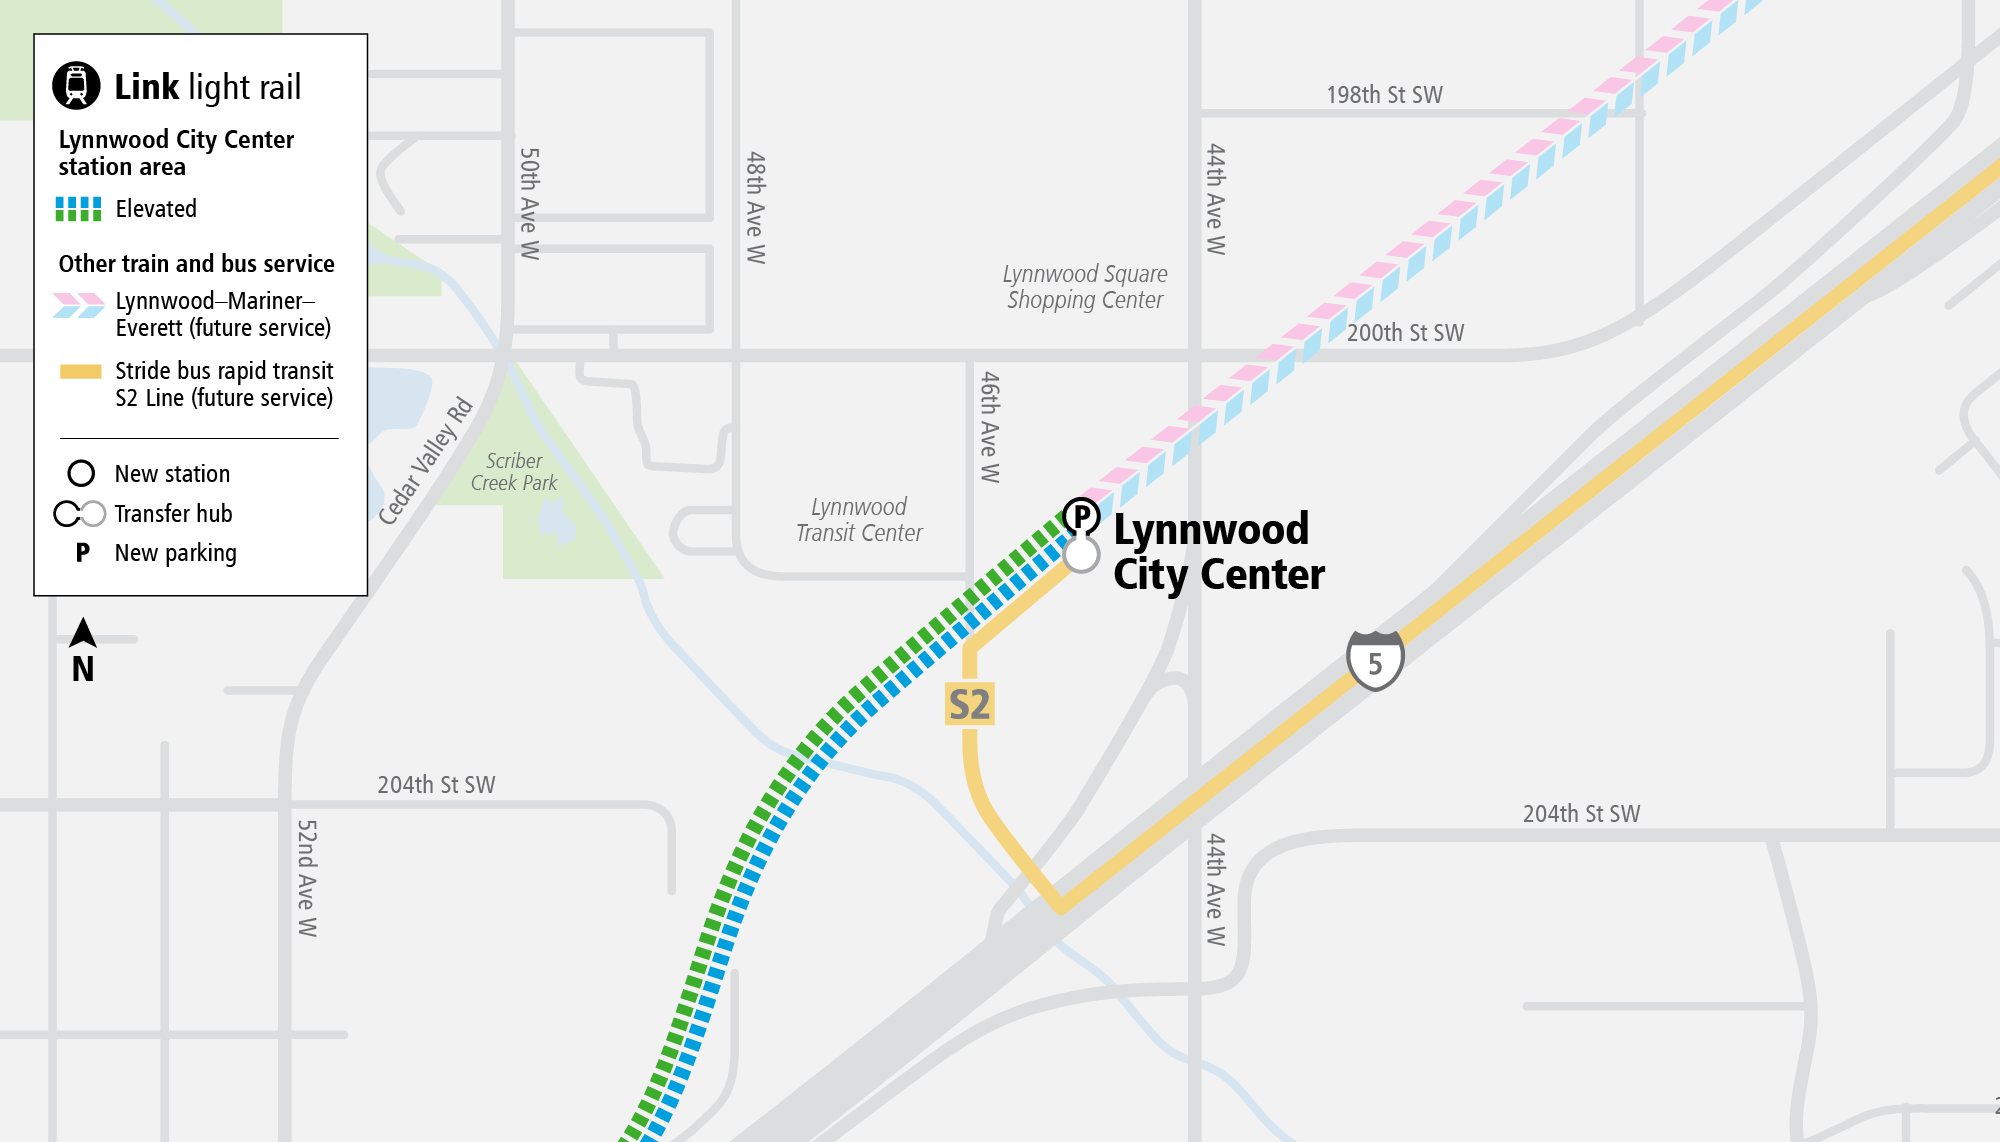 Map of the area surrounding Lynnwood City Center Station